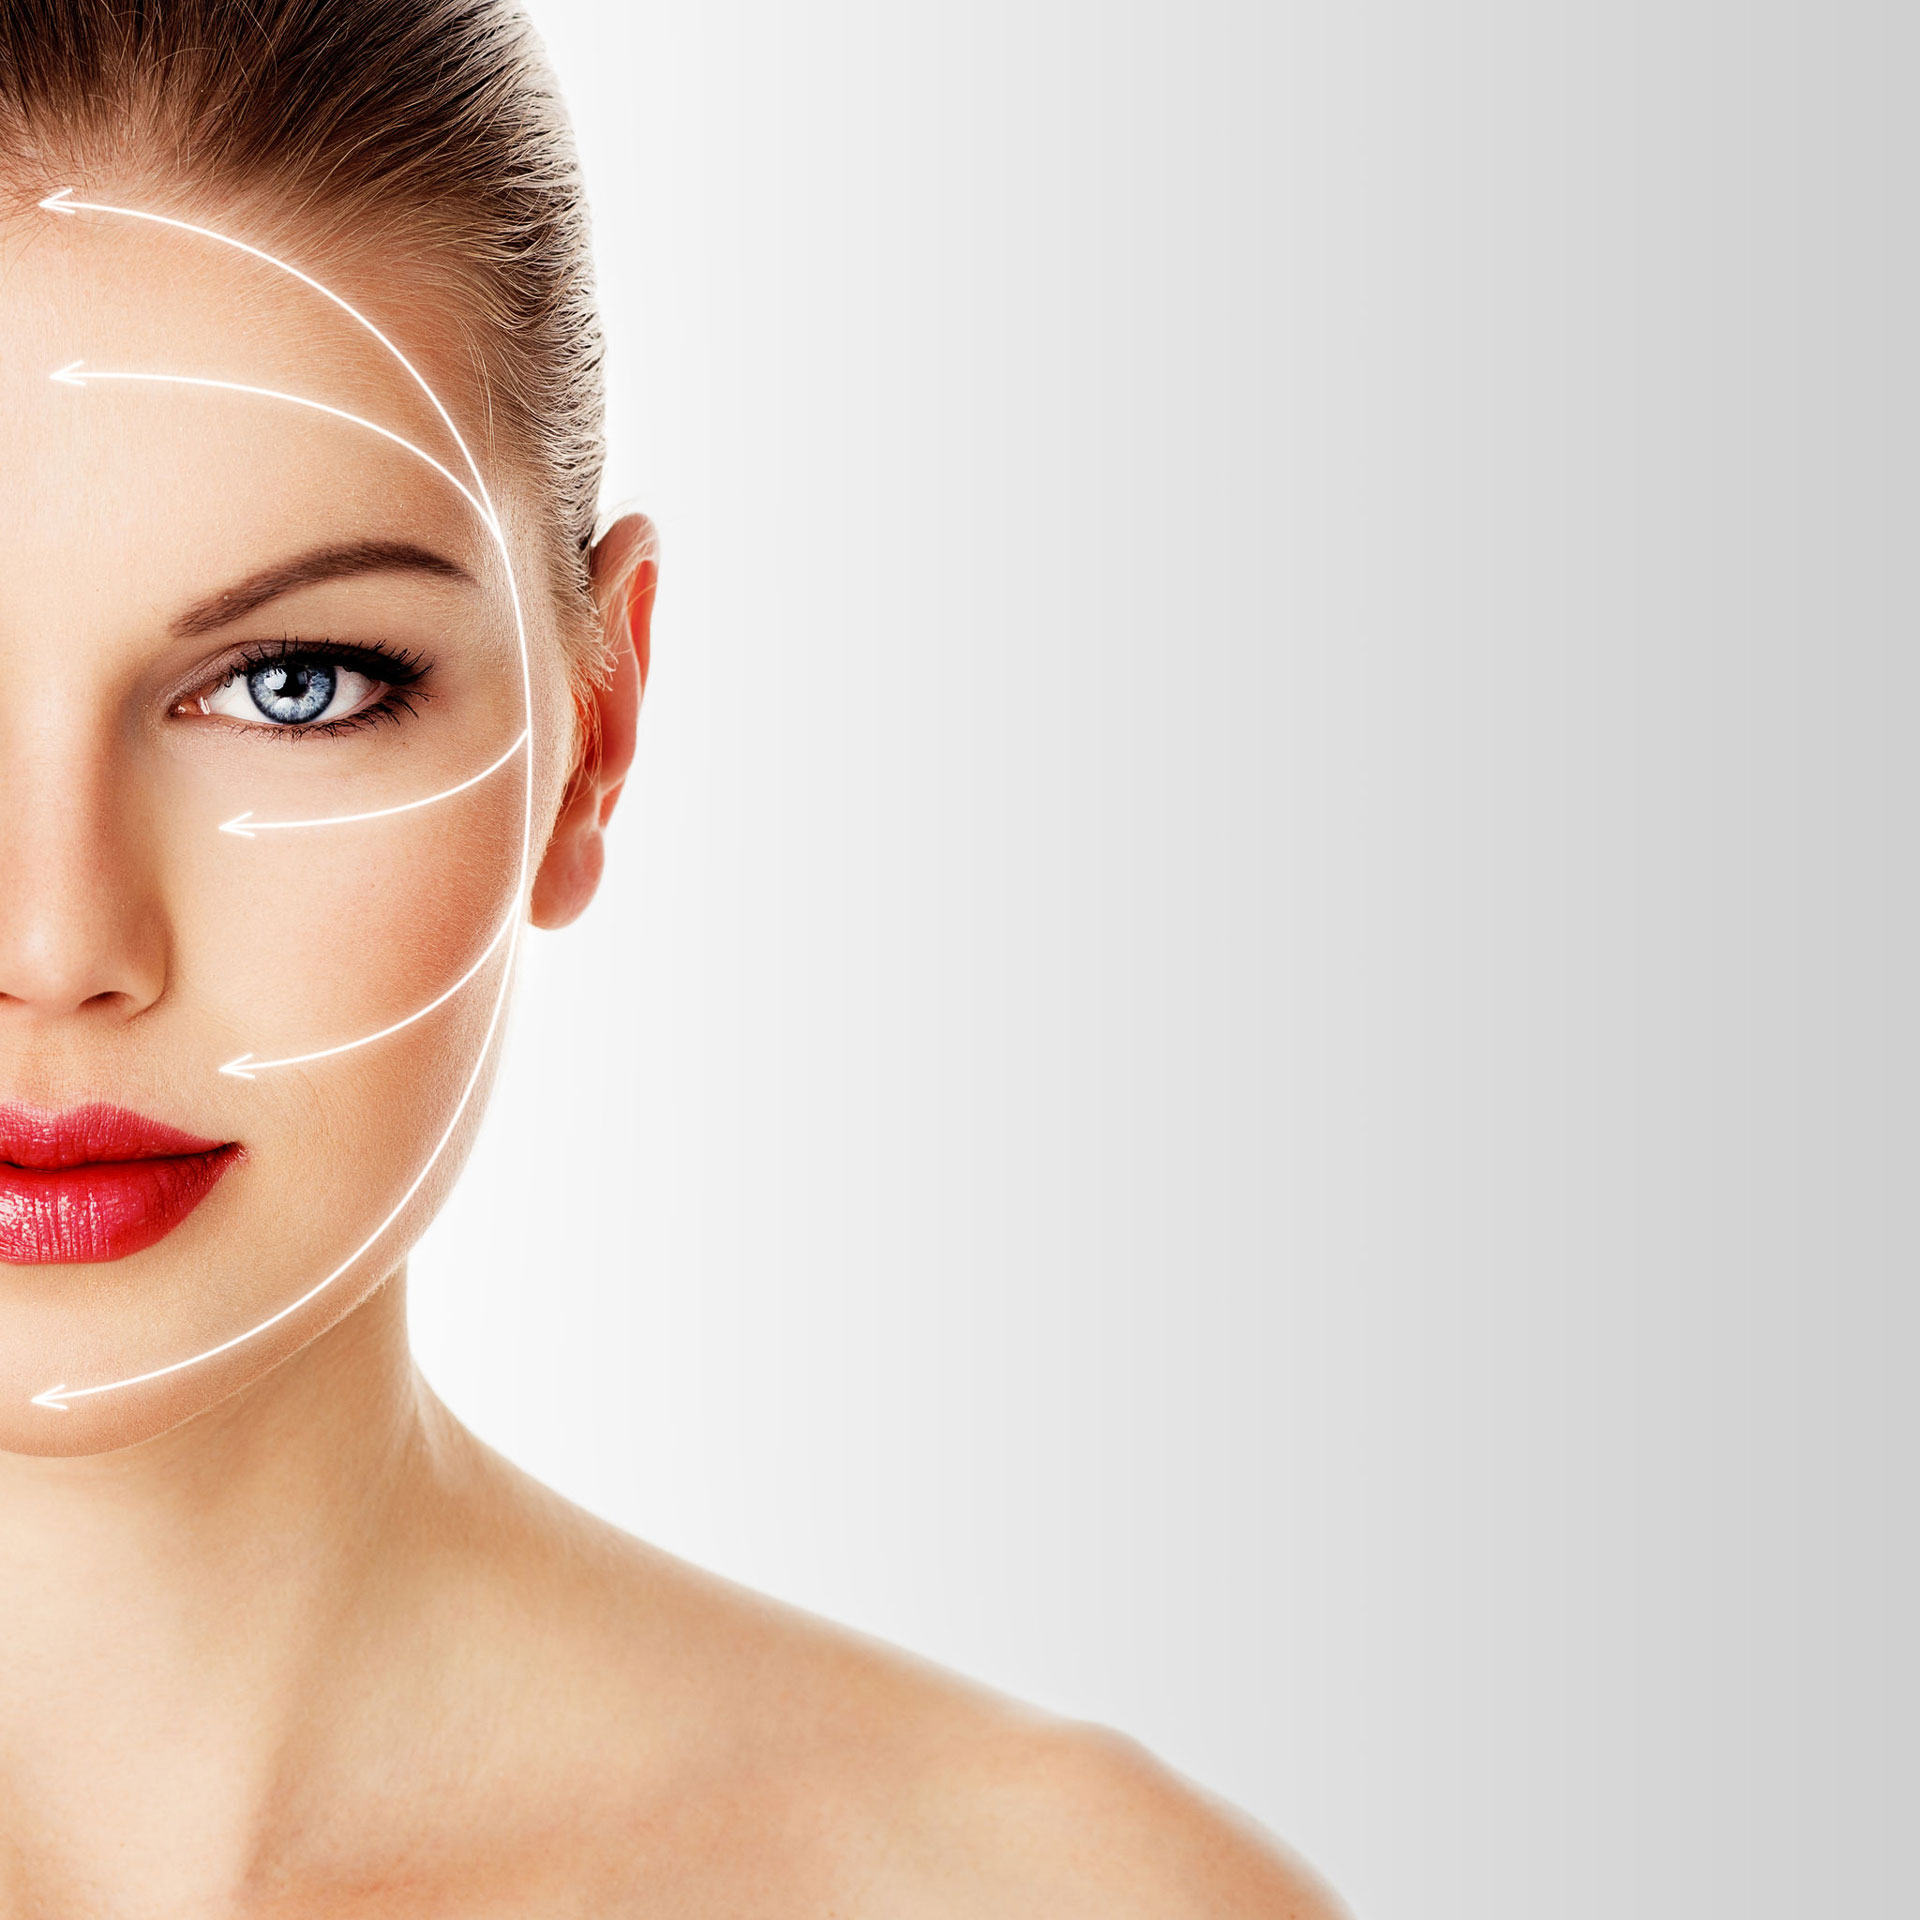 Aesthetic Anti‐ageing Surgery And Technology: Women's